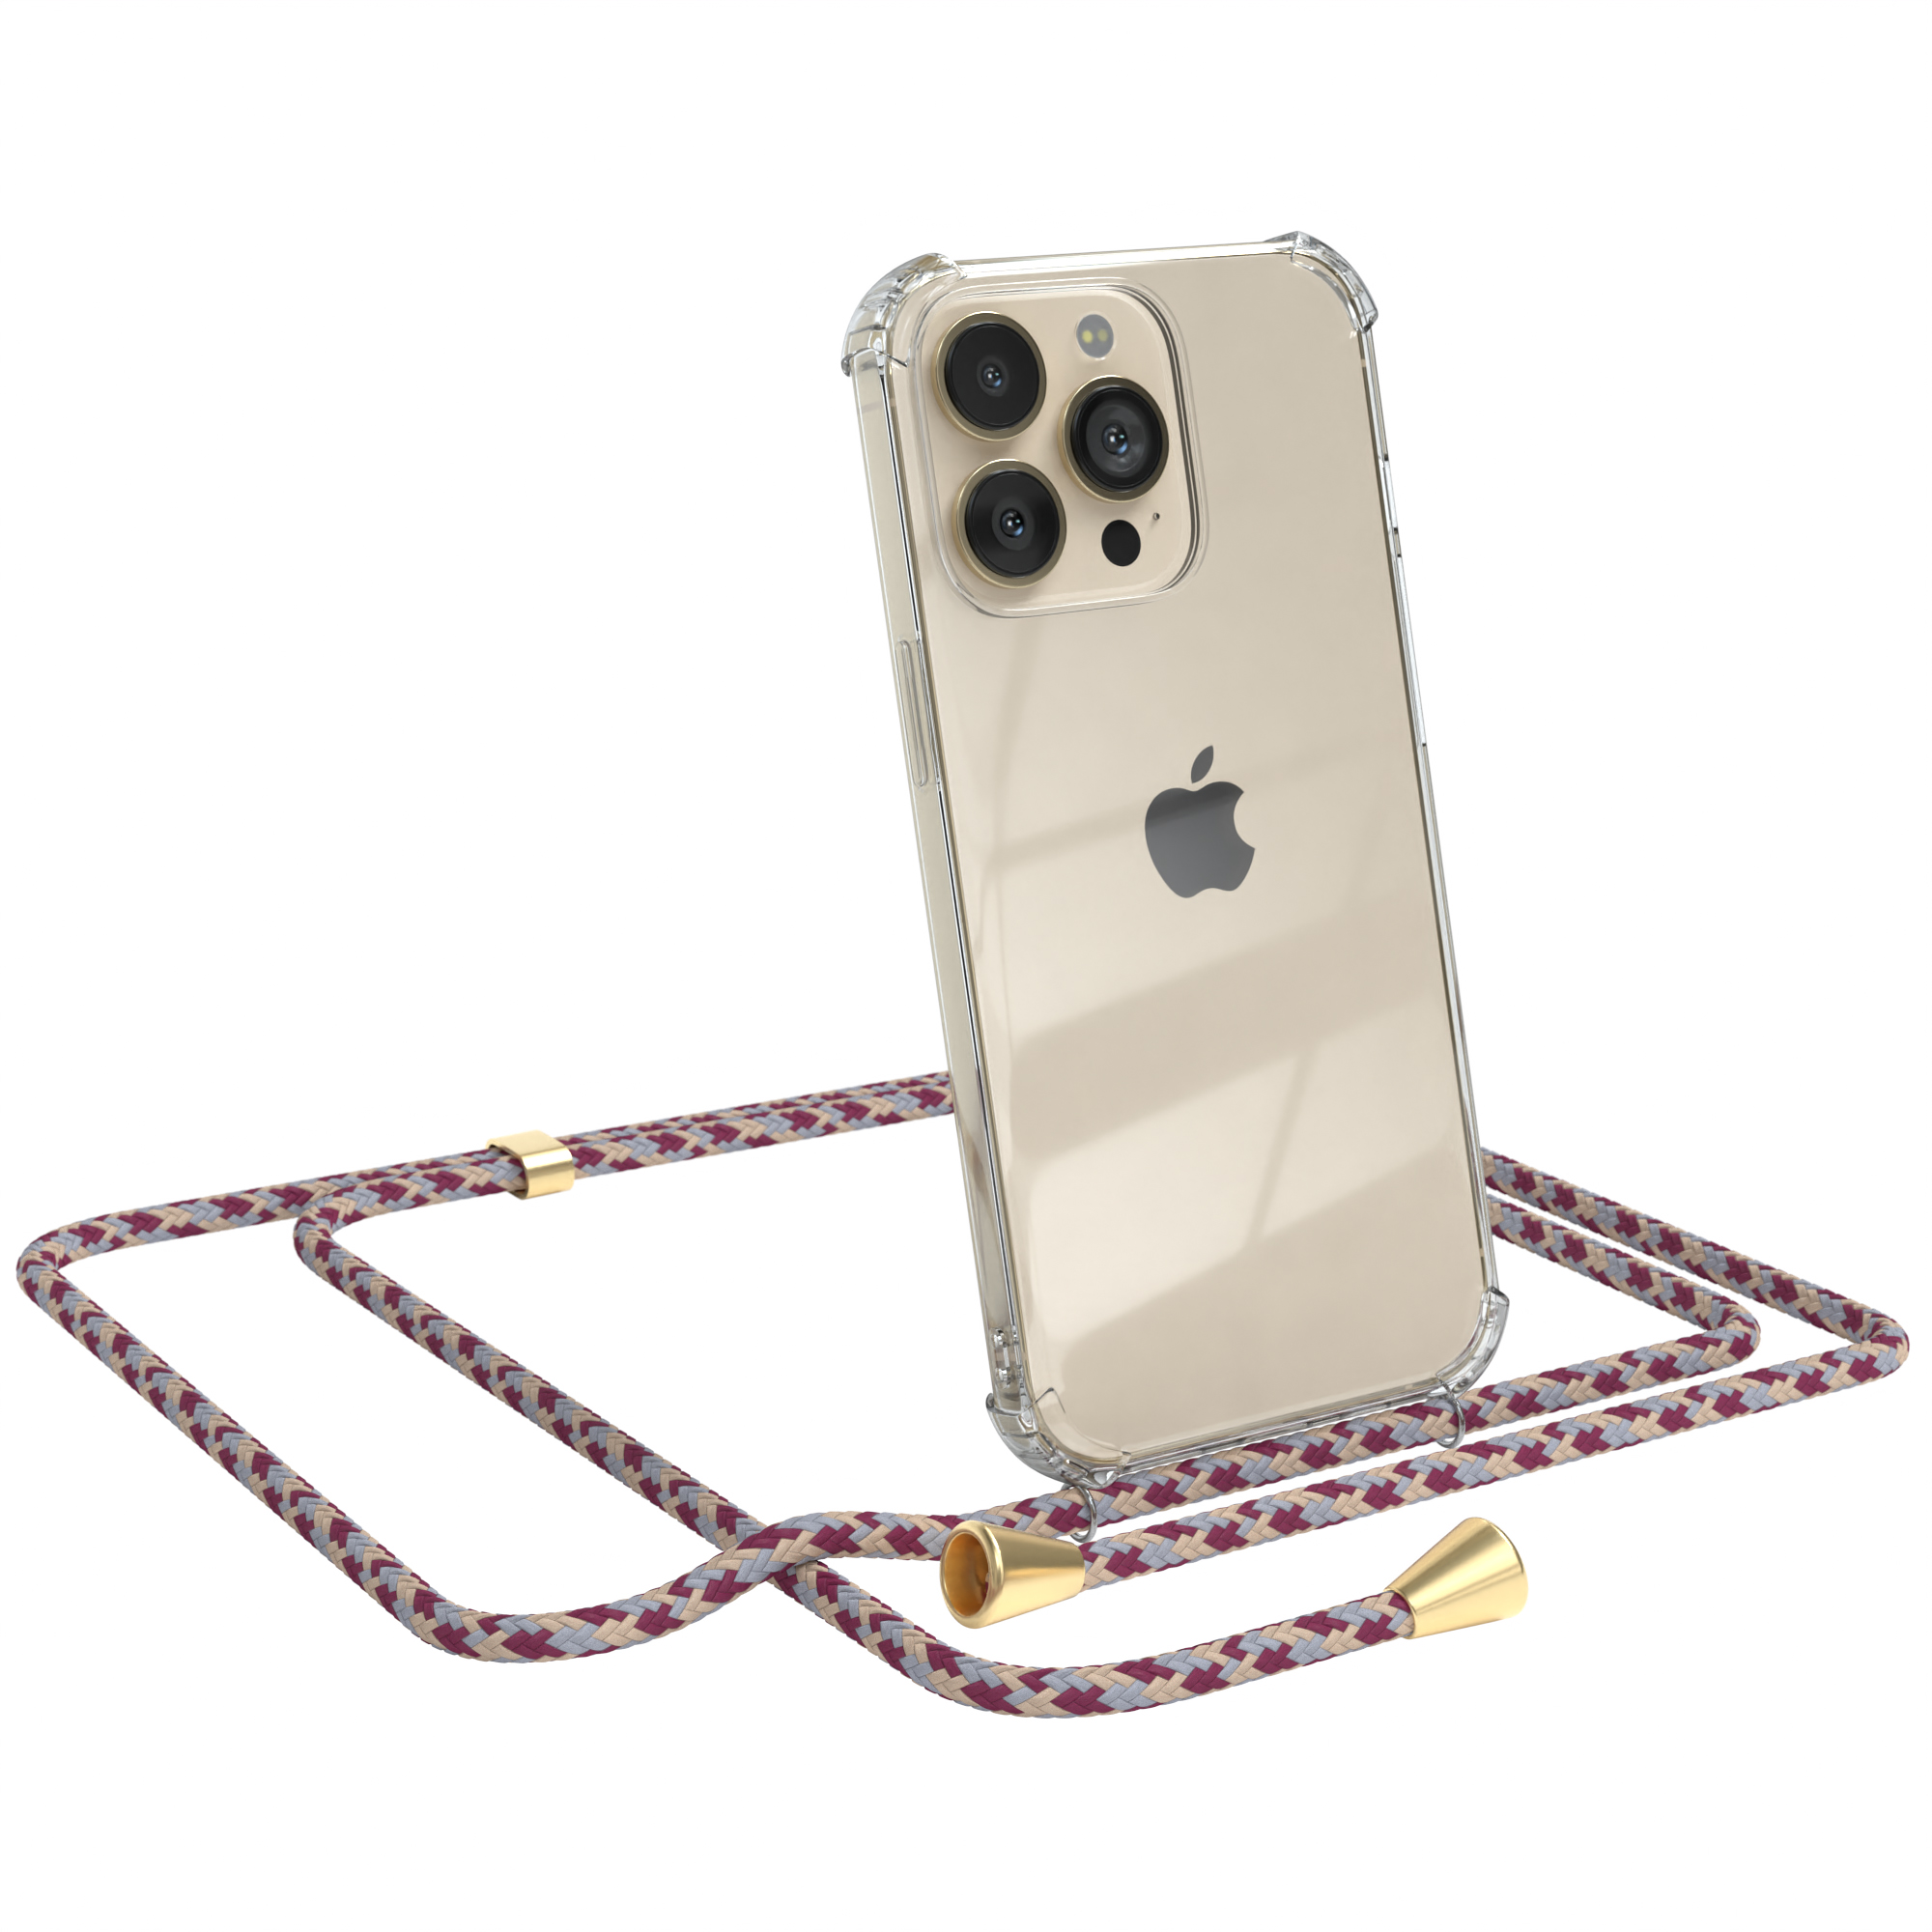 EAZY CASE Clear Pro, Umhängeband, Cover Beige Rot Apple, / 13 mit Umhängetasche, Gold iPhone Camouflage Clips